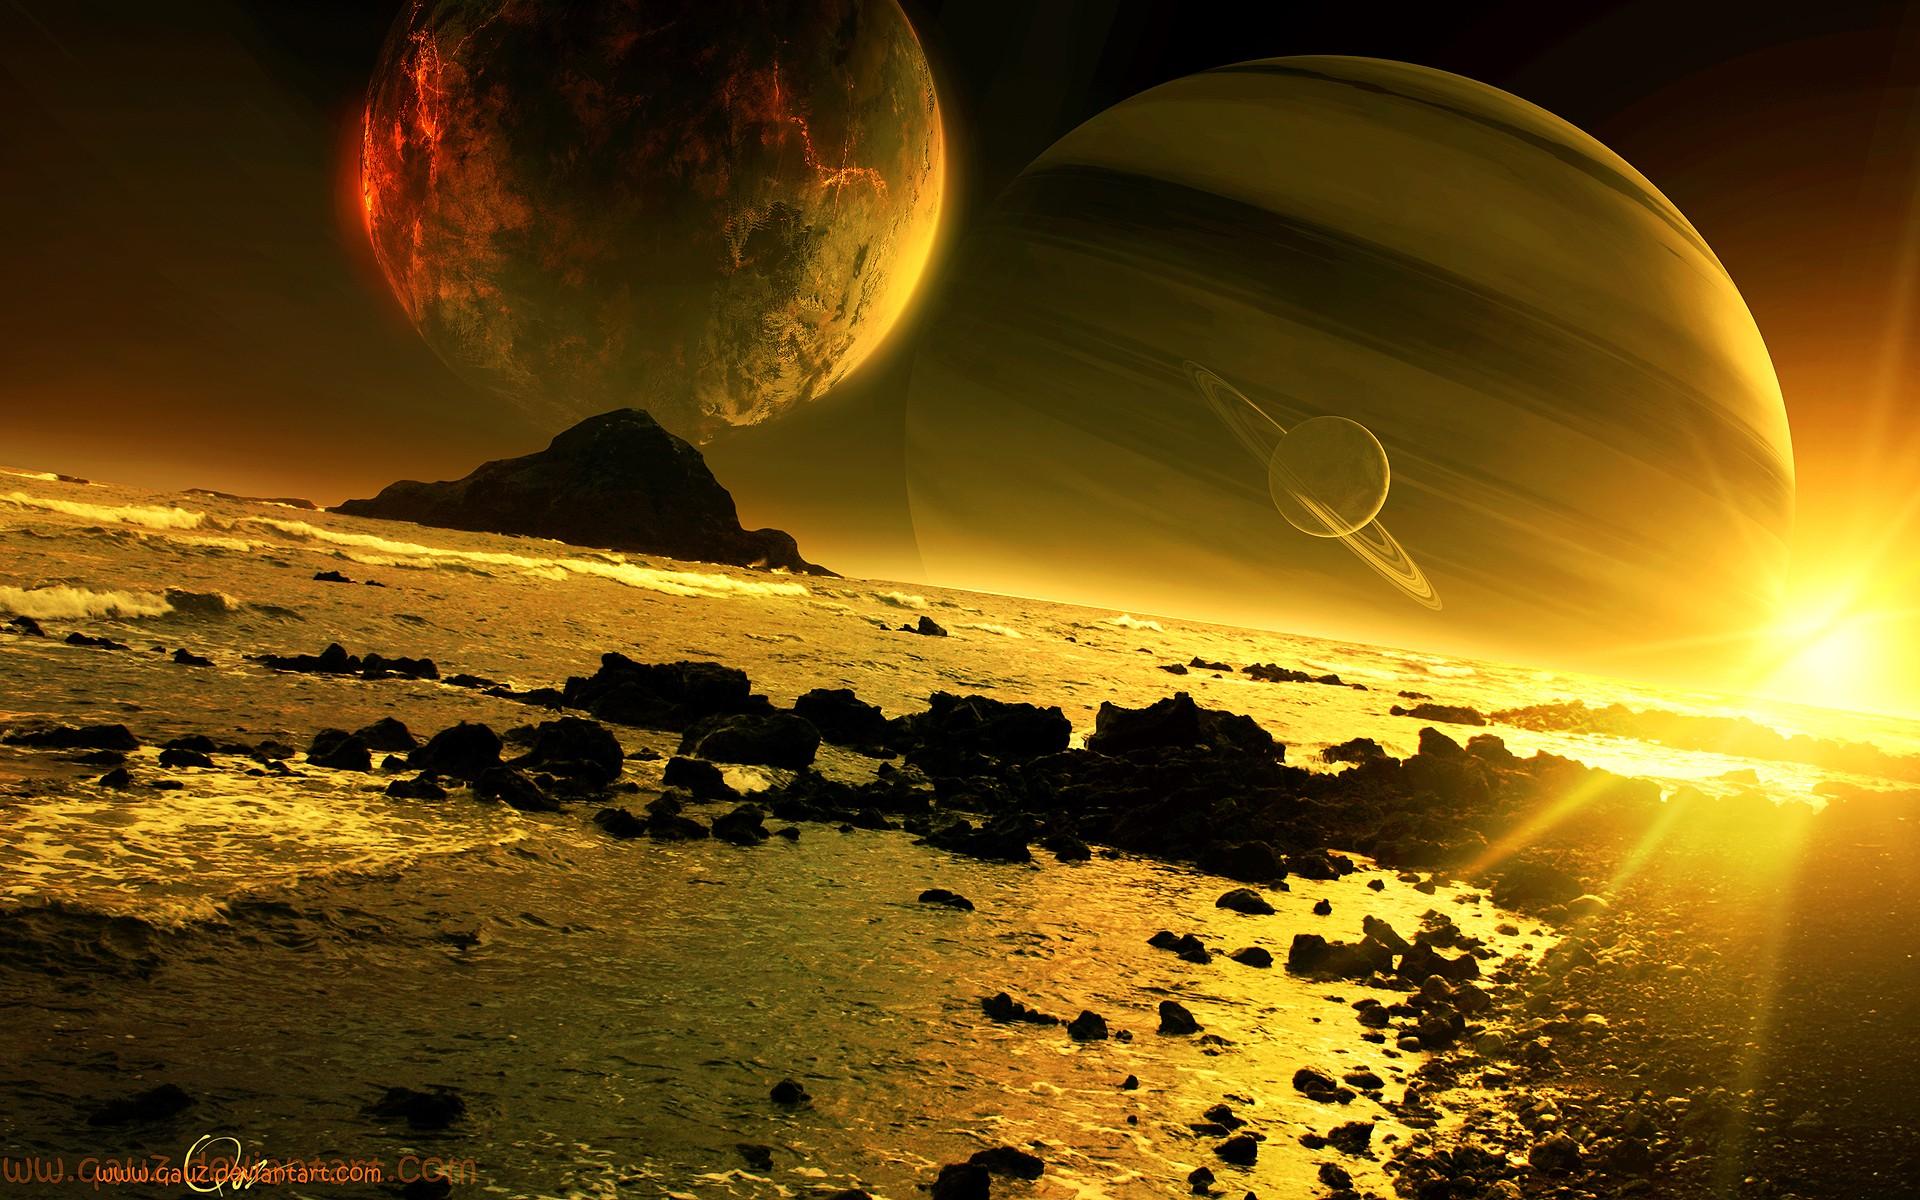 sunrise, outer space, planets, golden, digital art, science